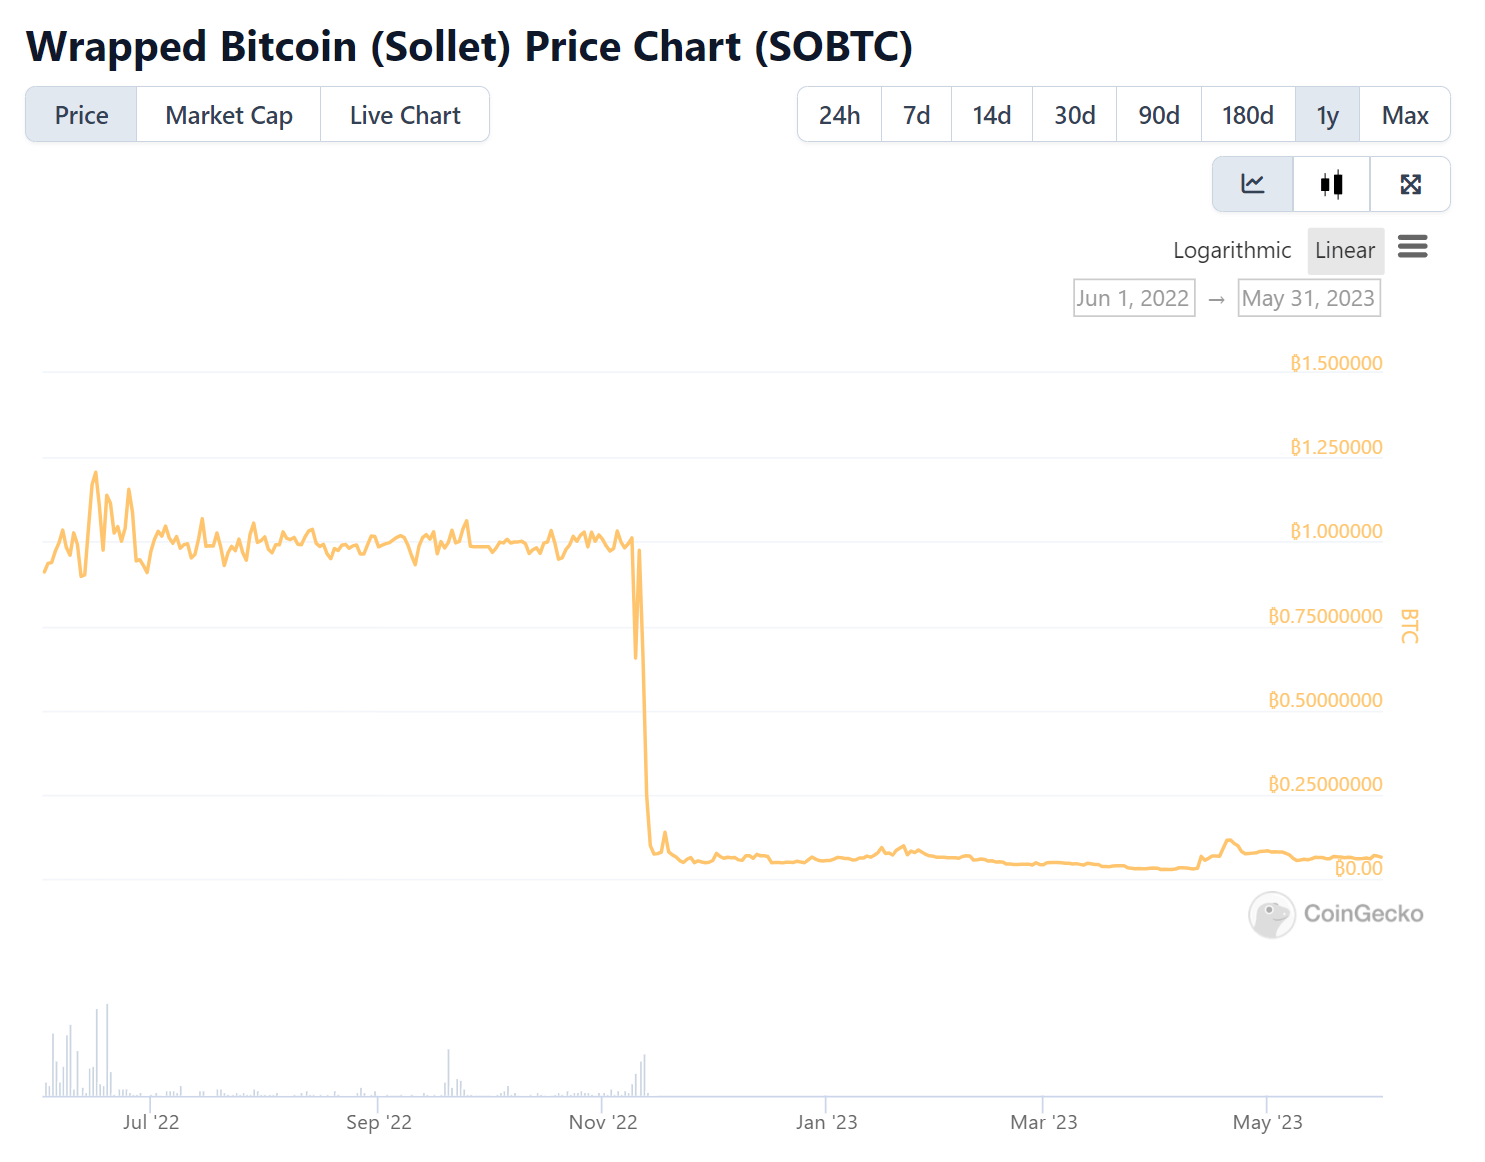 Sollet wrapped bitcoin (SOBTC) price chart from CoinGecko showing FTX collapse